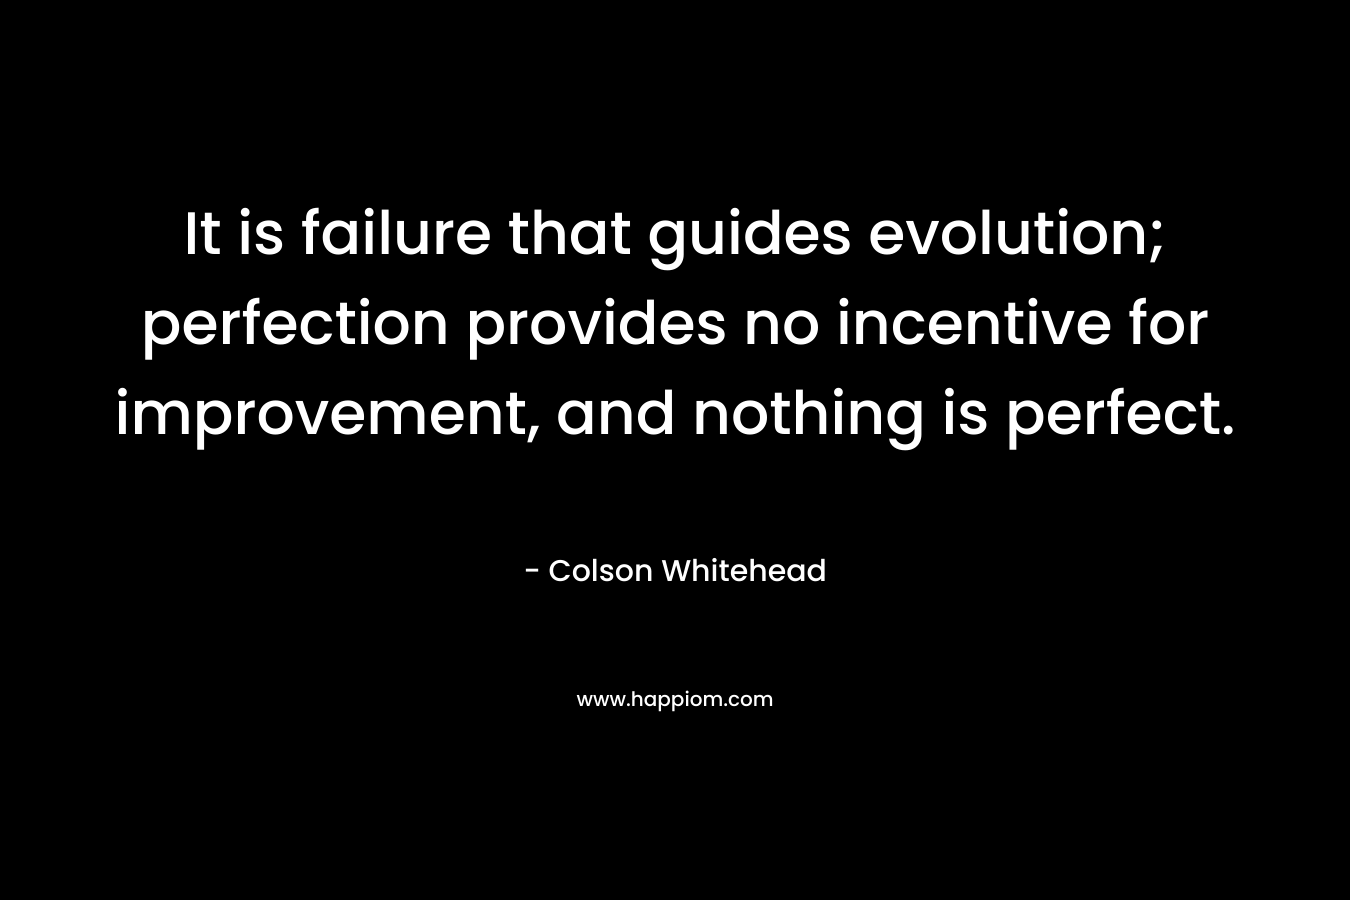 It is failure that guides evolution; perfection provides no incentive for improvement, and nothing is perfect. – Colson Whitehead